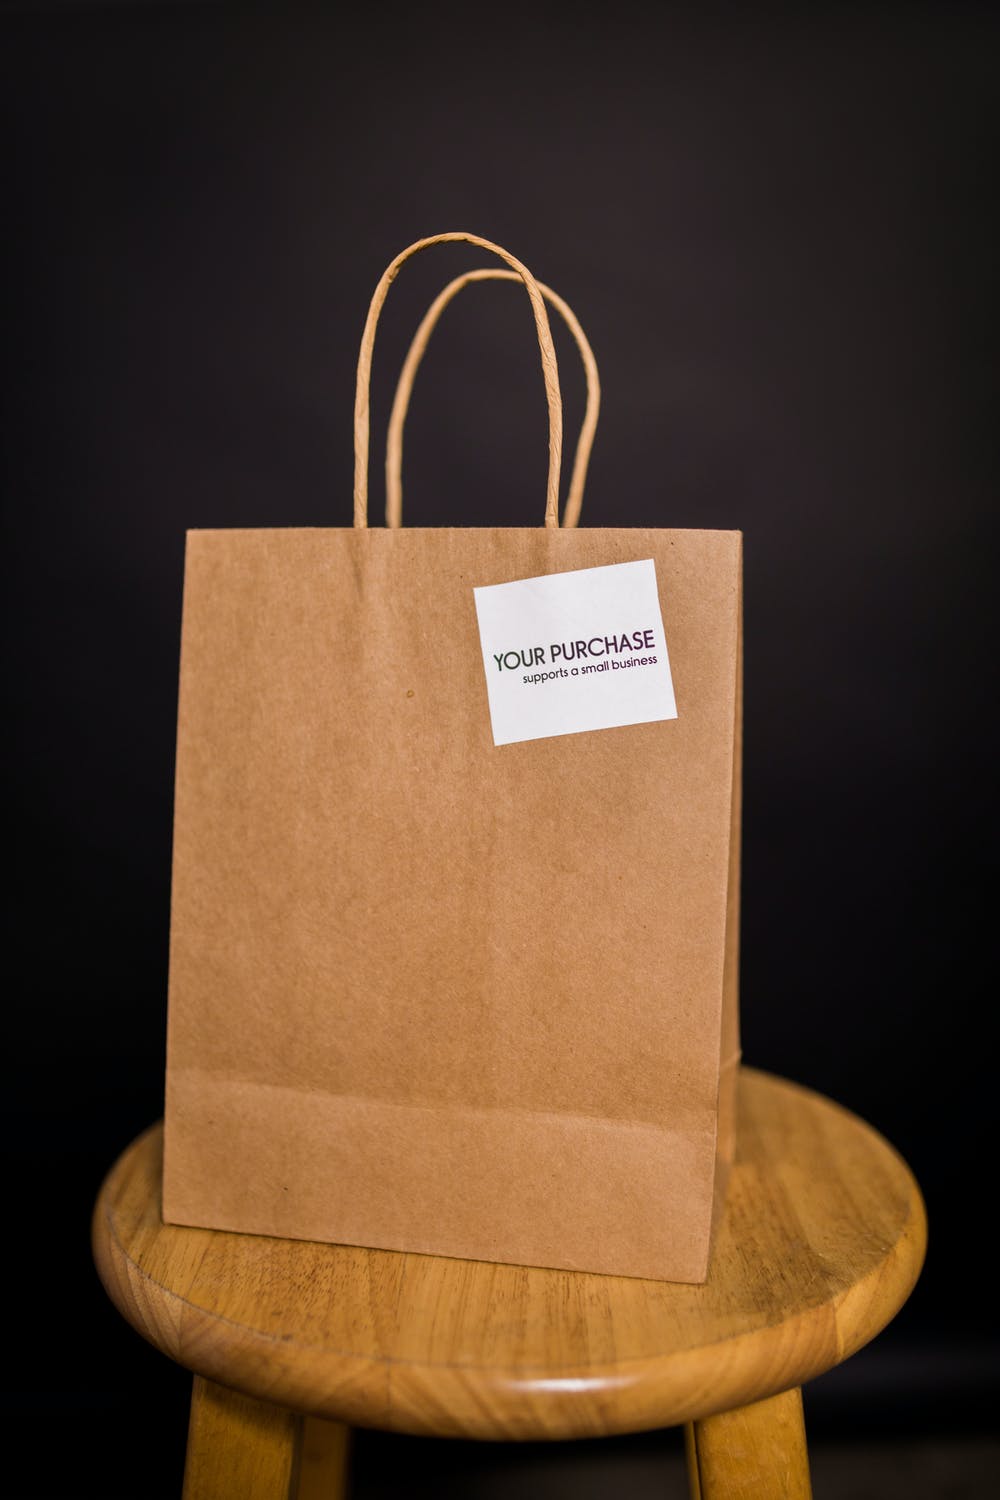 200 X Brown Twisted Handle Kraft Paper Bags Size Baby